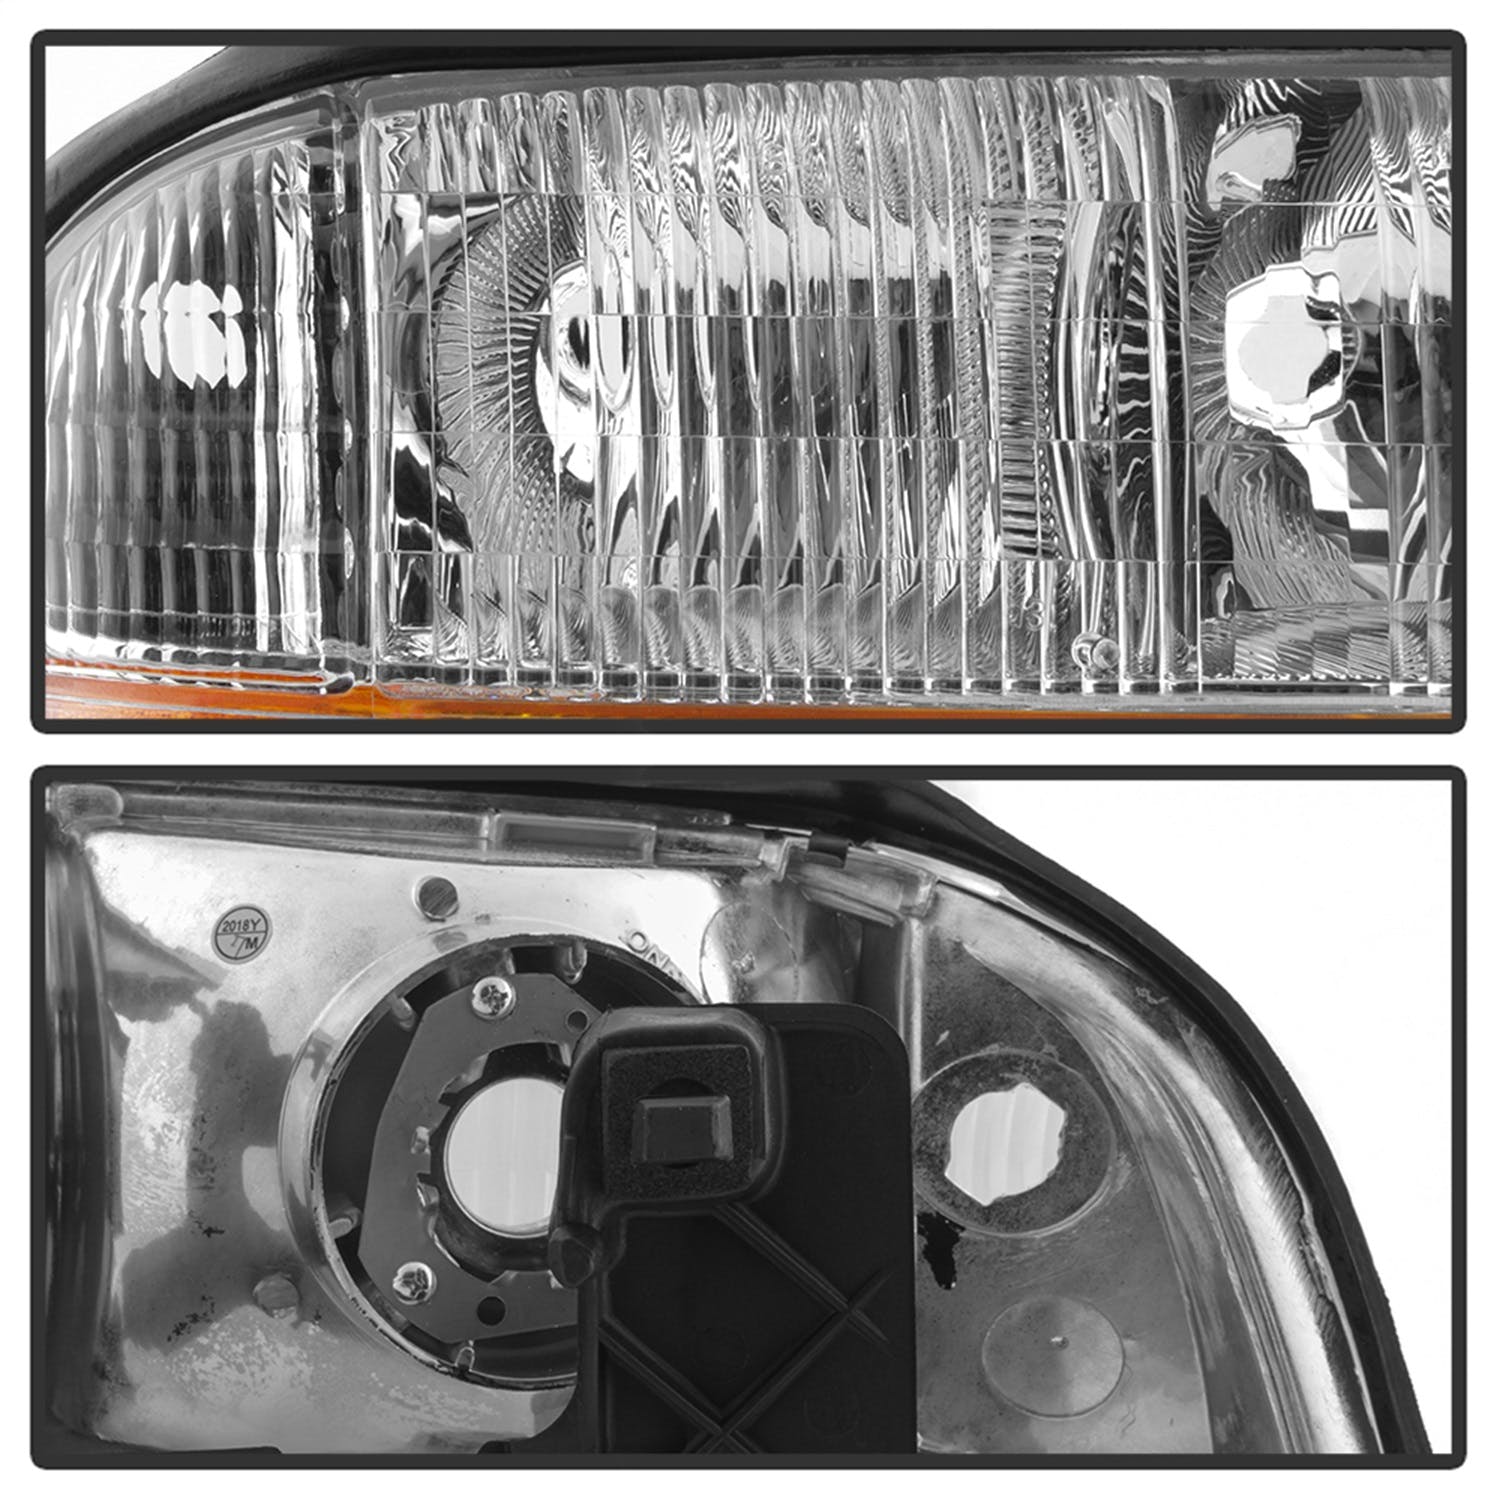 XTUNE POWER 9042690 GMC S 15 Sonoma 98 04 (with Fog Lights Models Only) GMC Jimmy S 15 98 01 (with Fog Lights Models Only) Oldsmobile Bravada 98 01 (with Fog Lights Models Only) OEM Style Headlights With Amber Bumper Chrome